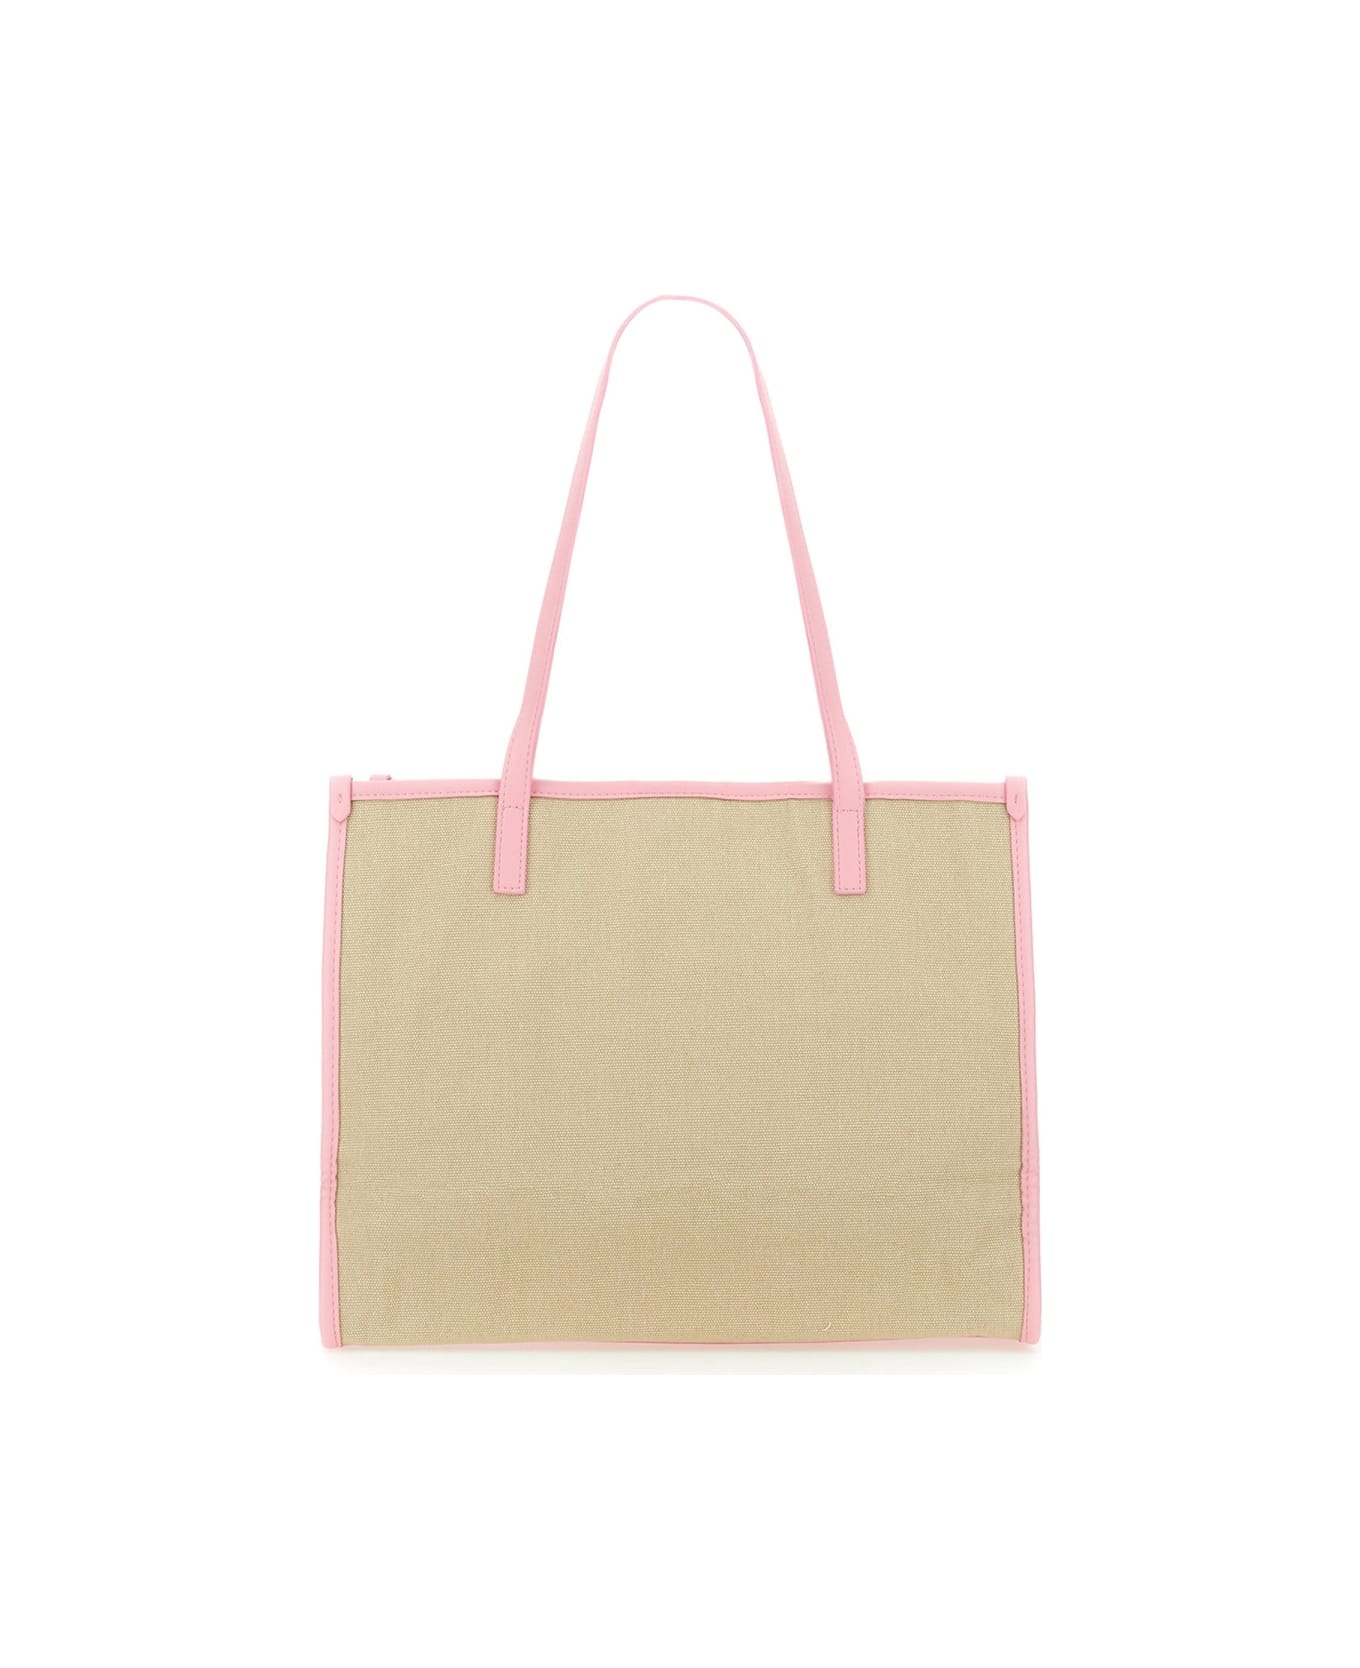 MSGM Tote Bag With Logo - PINK